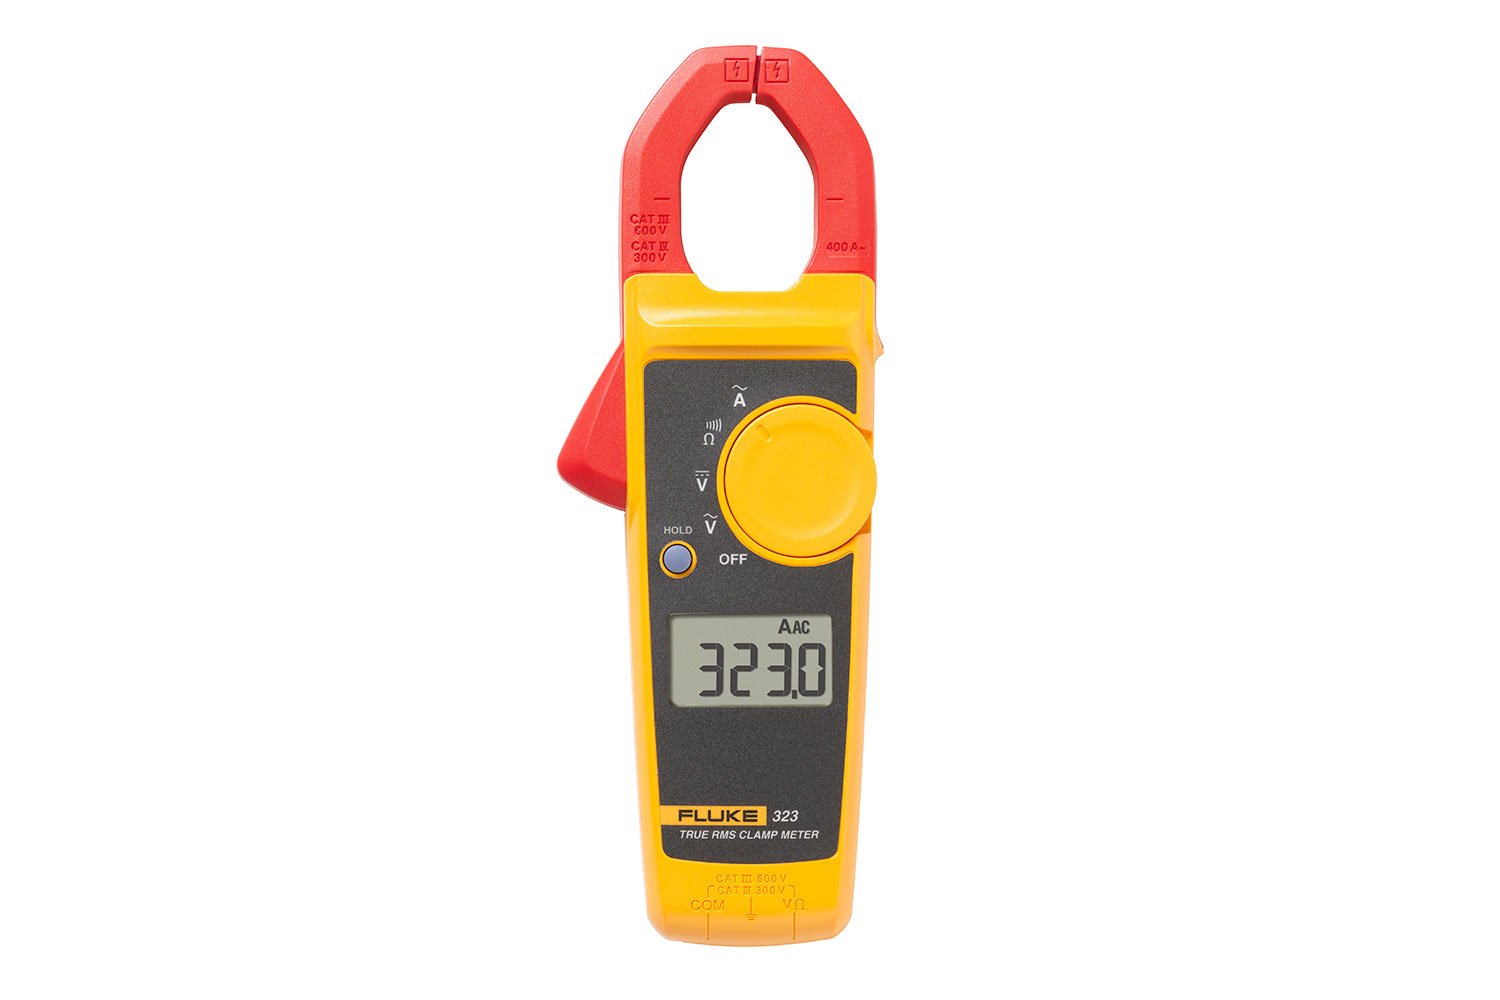 Renewed Fluke 323 True-RMS Clamp Meter with a NIST-Traceable Calibration Certificate with Data 